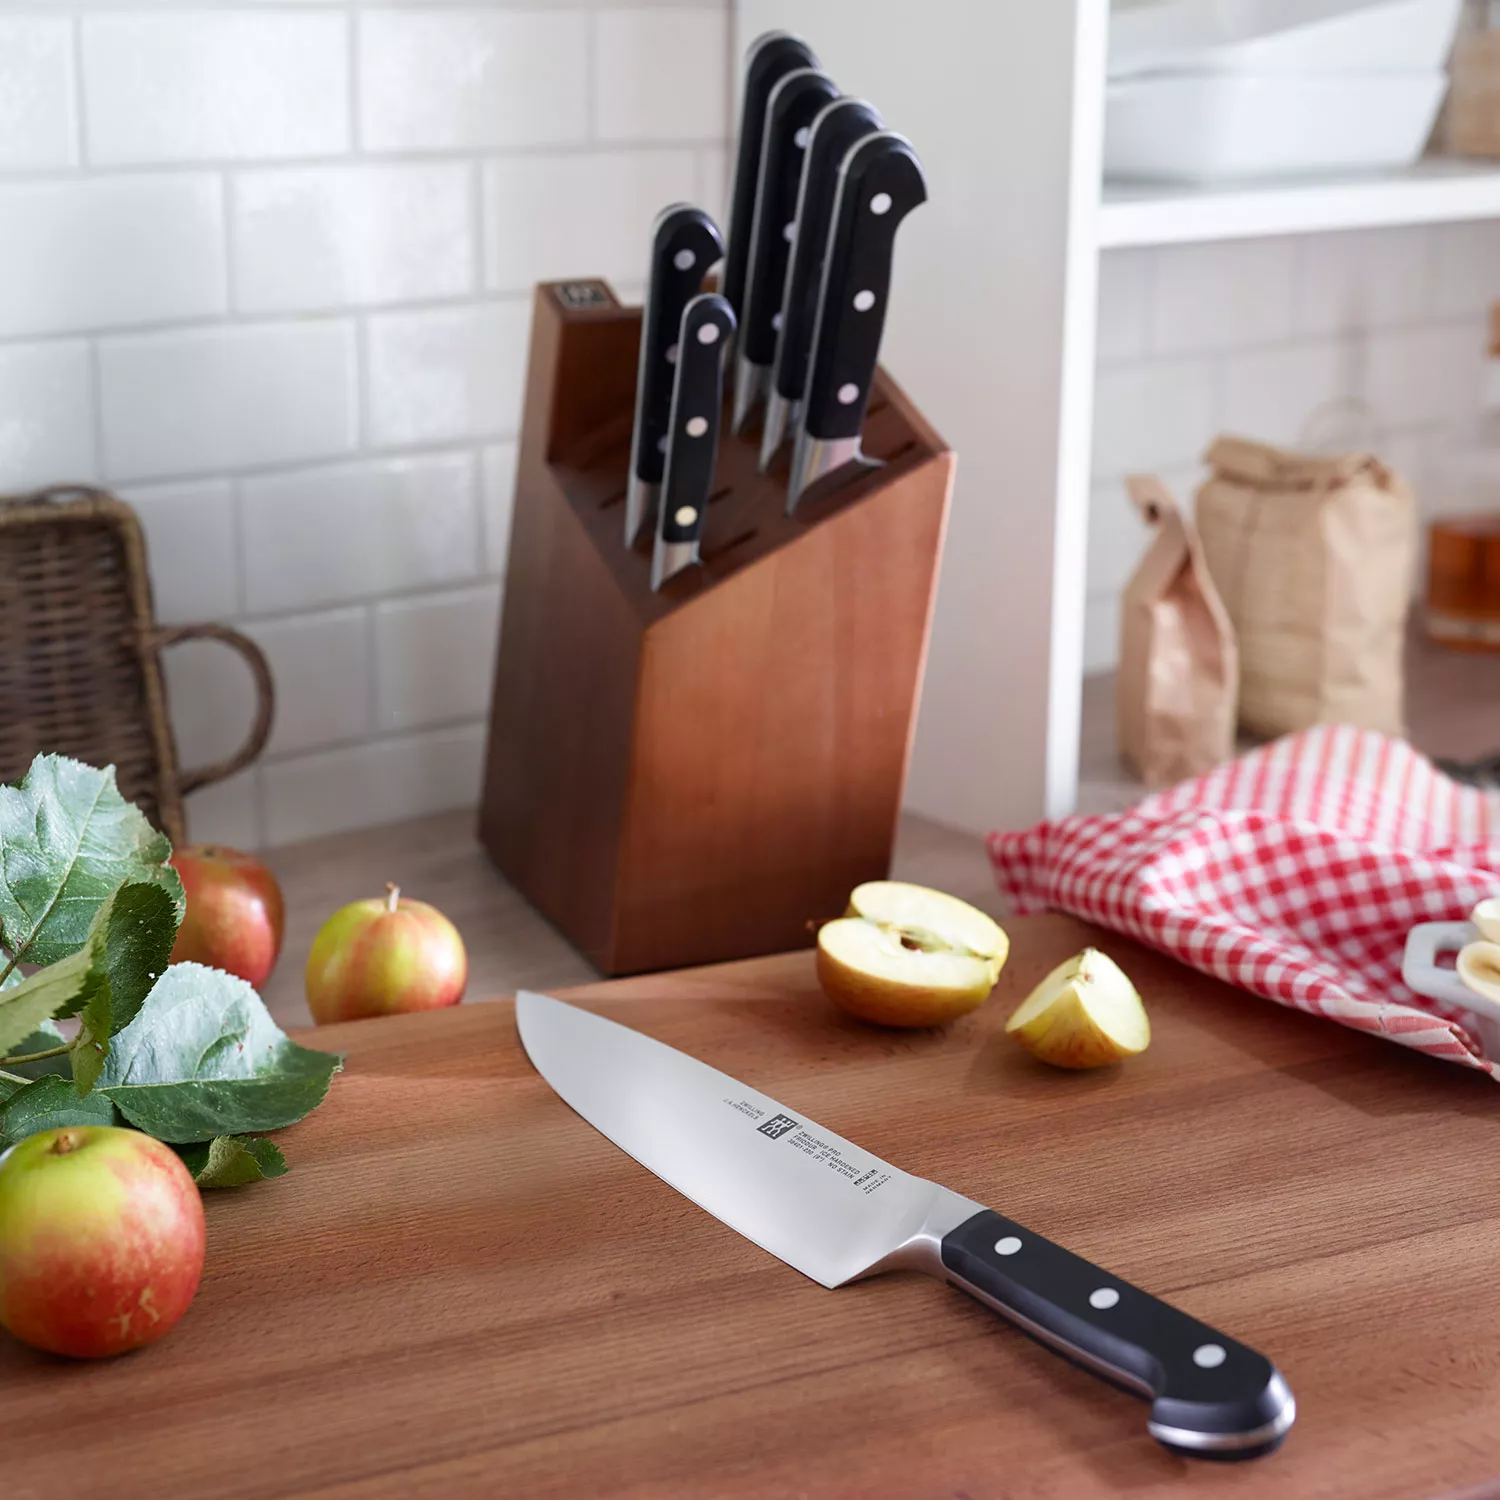 Black Friday 2020: Zwilling Pro 8-inch Chef's Knife